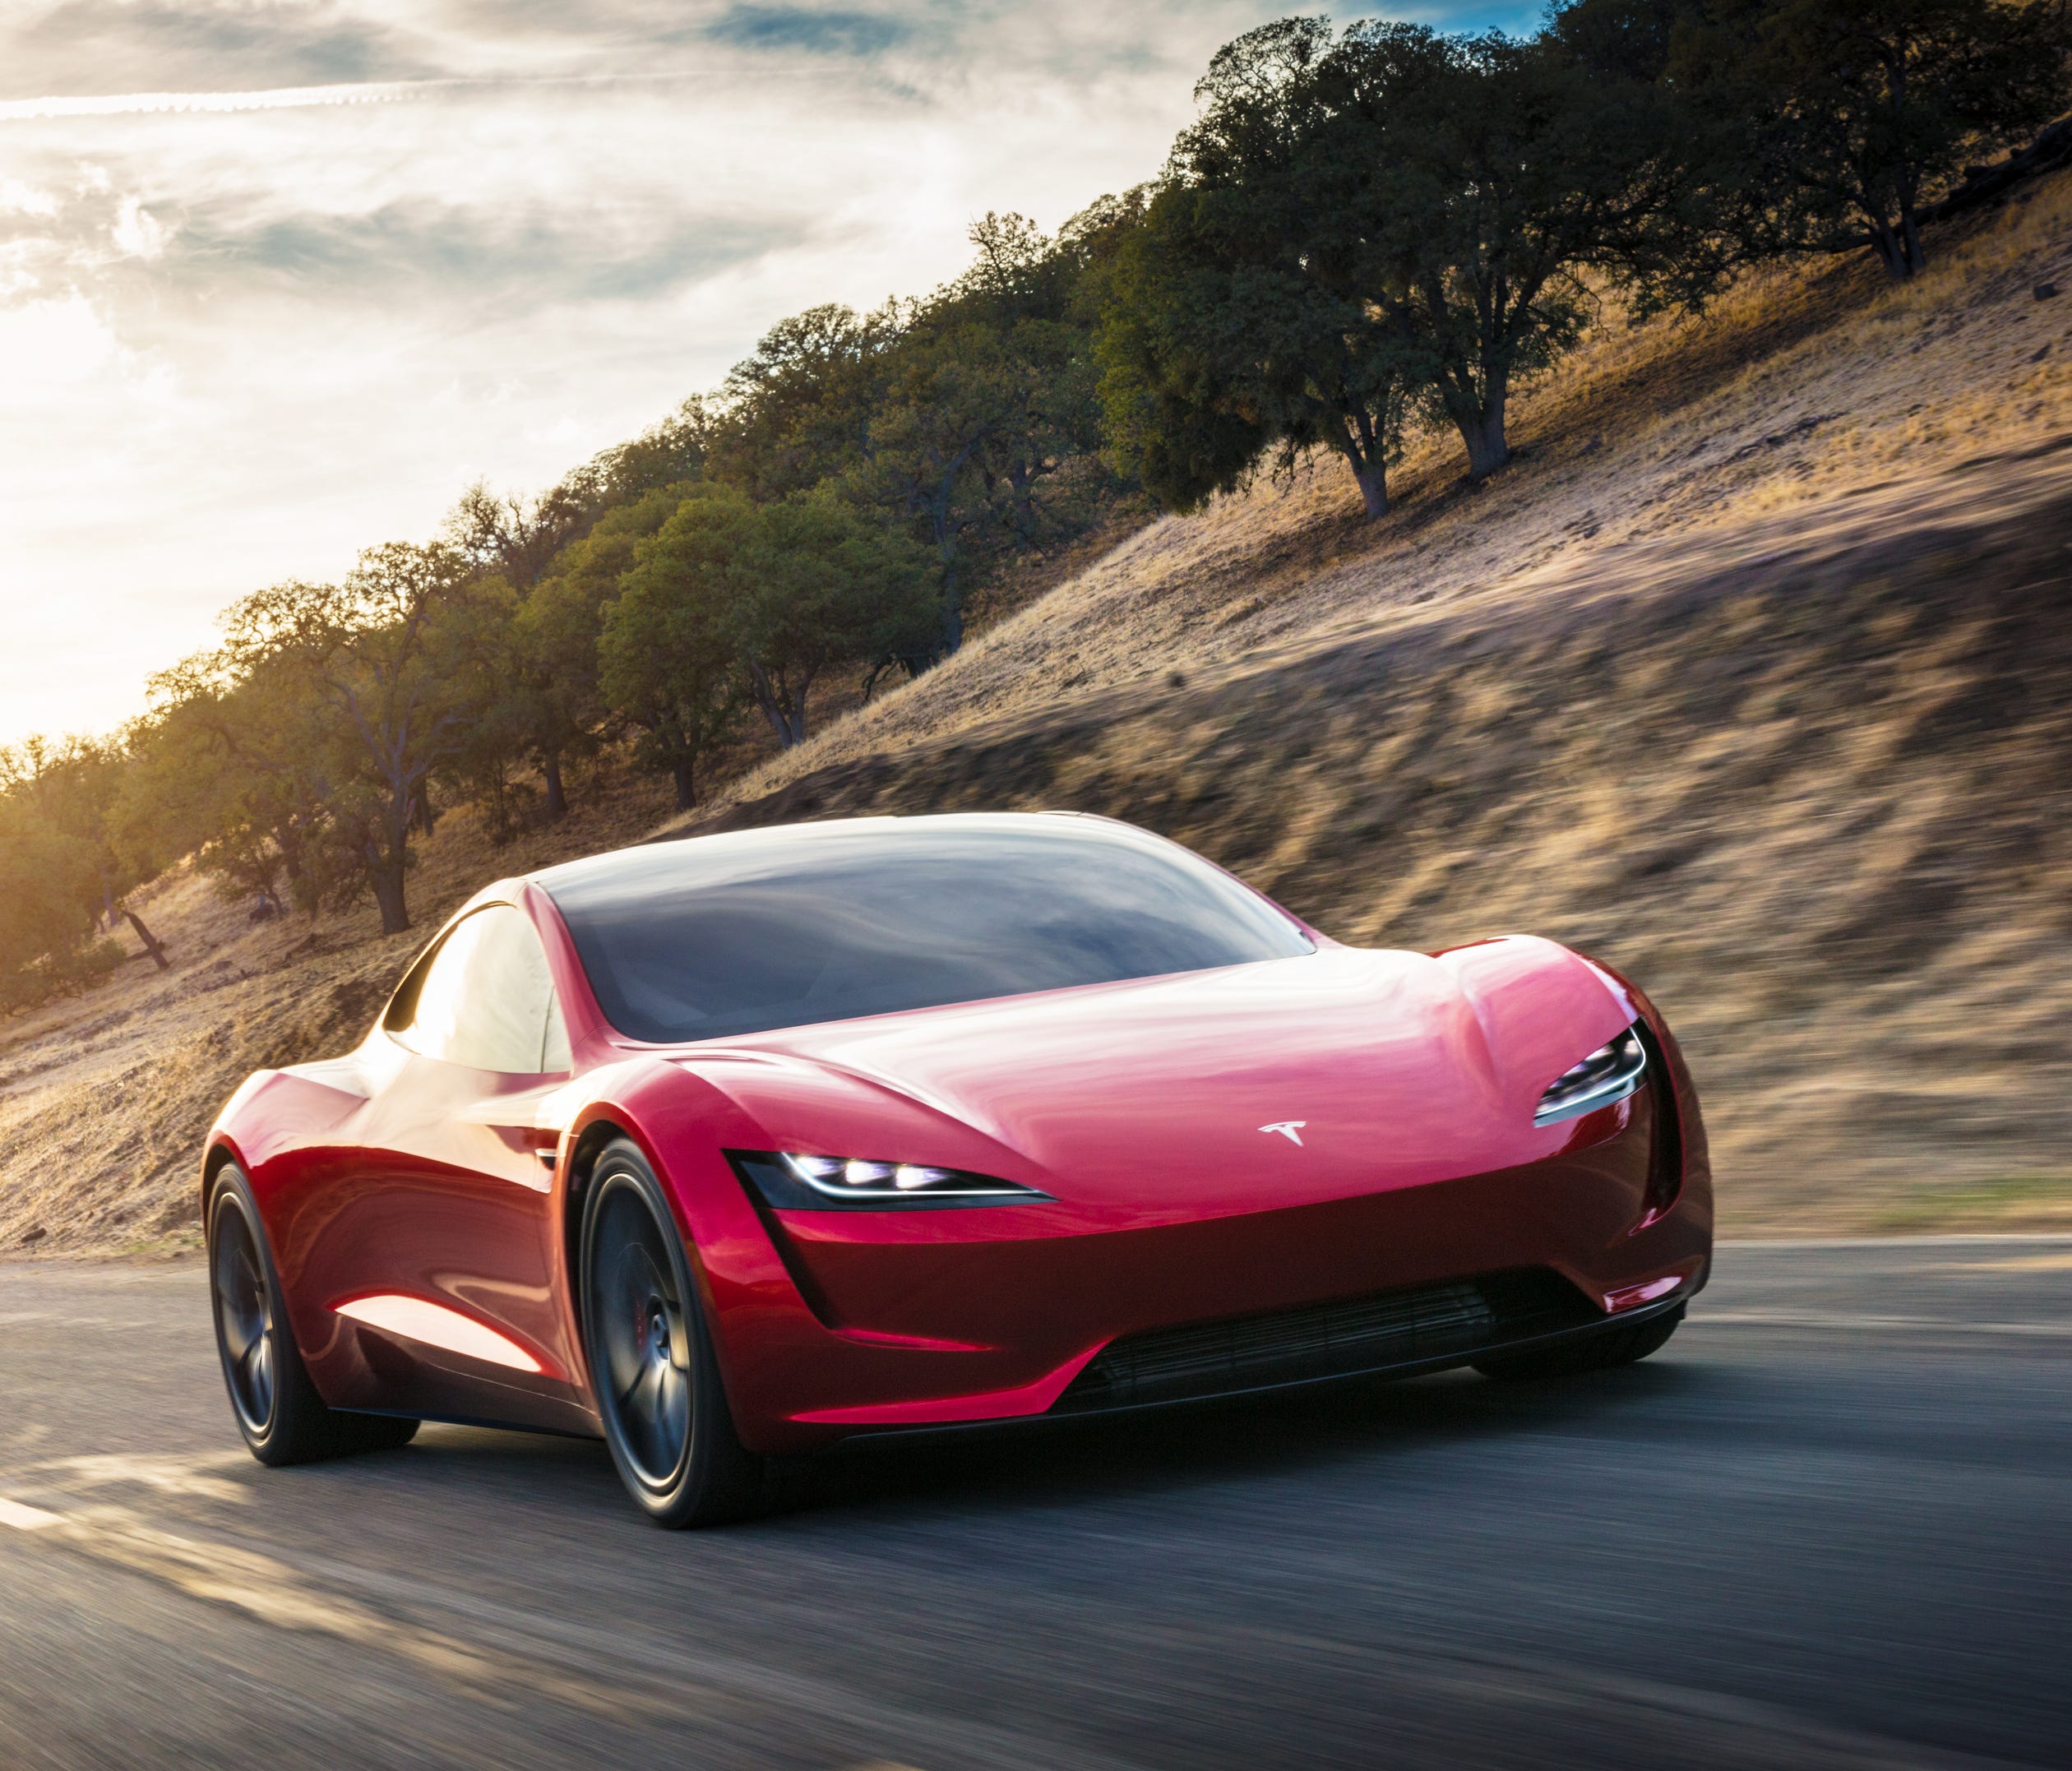 The new Tesla Roadster, slated for a few years down the road, will be the fastest car ever made with a zero to 60 mph time of 1.9 seconds.